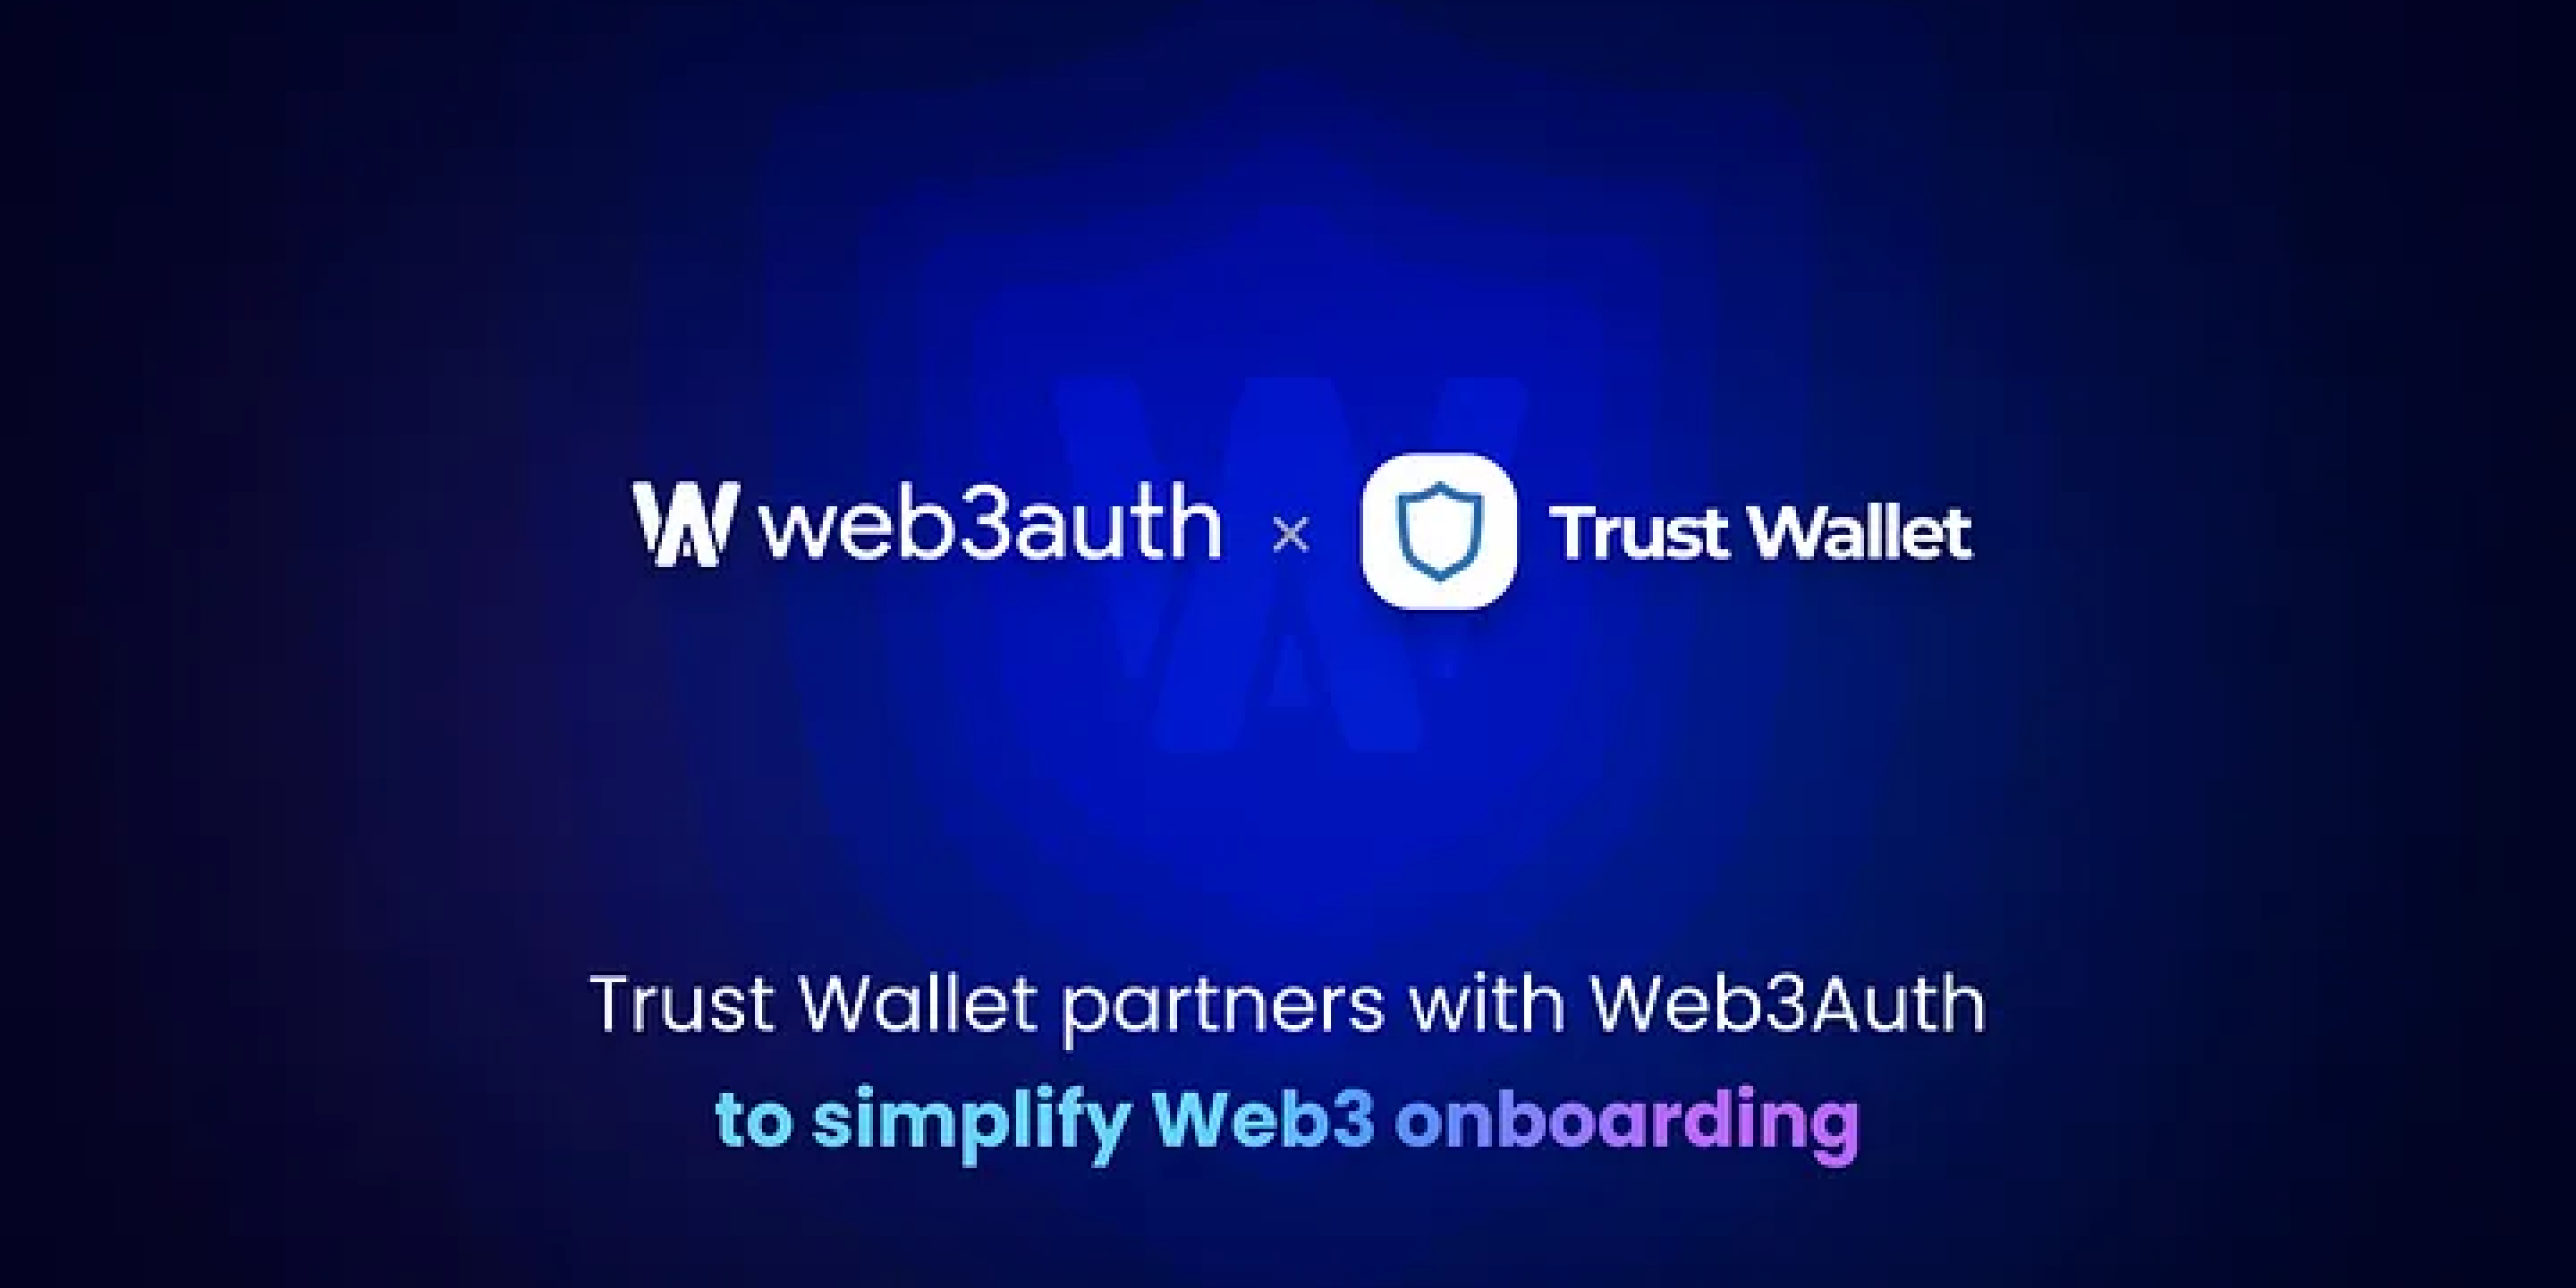 How to Use Add and Manage Multiple Wallets in the Trust Wallet